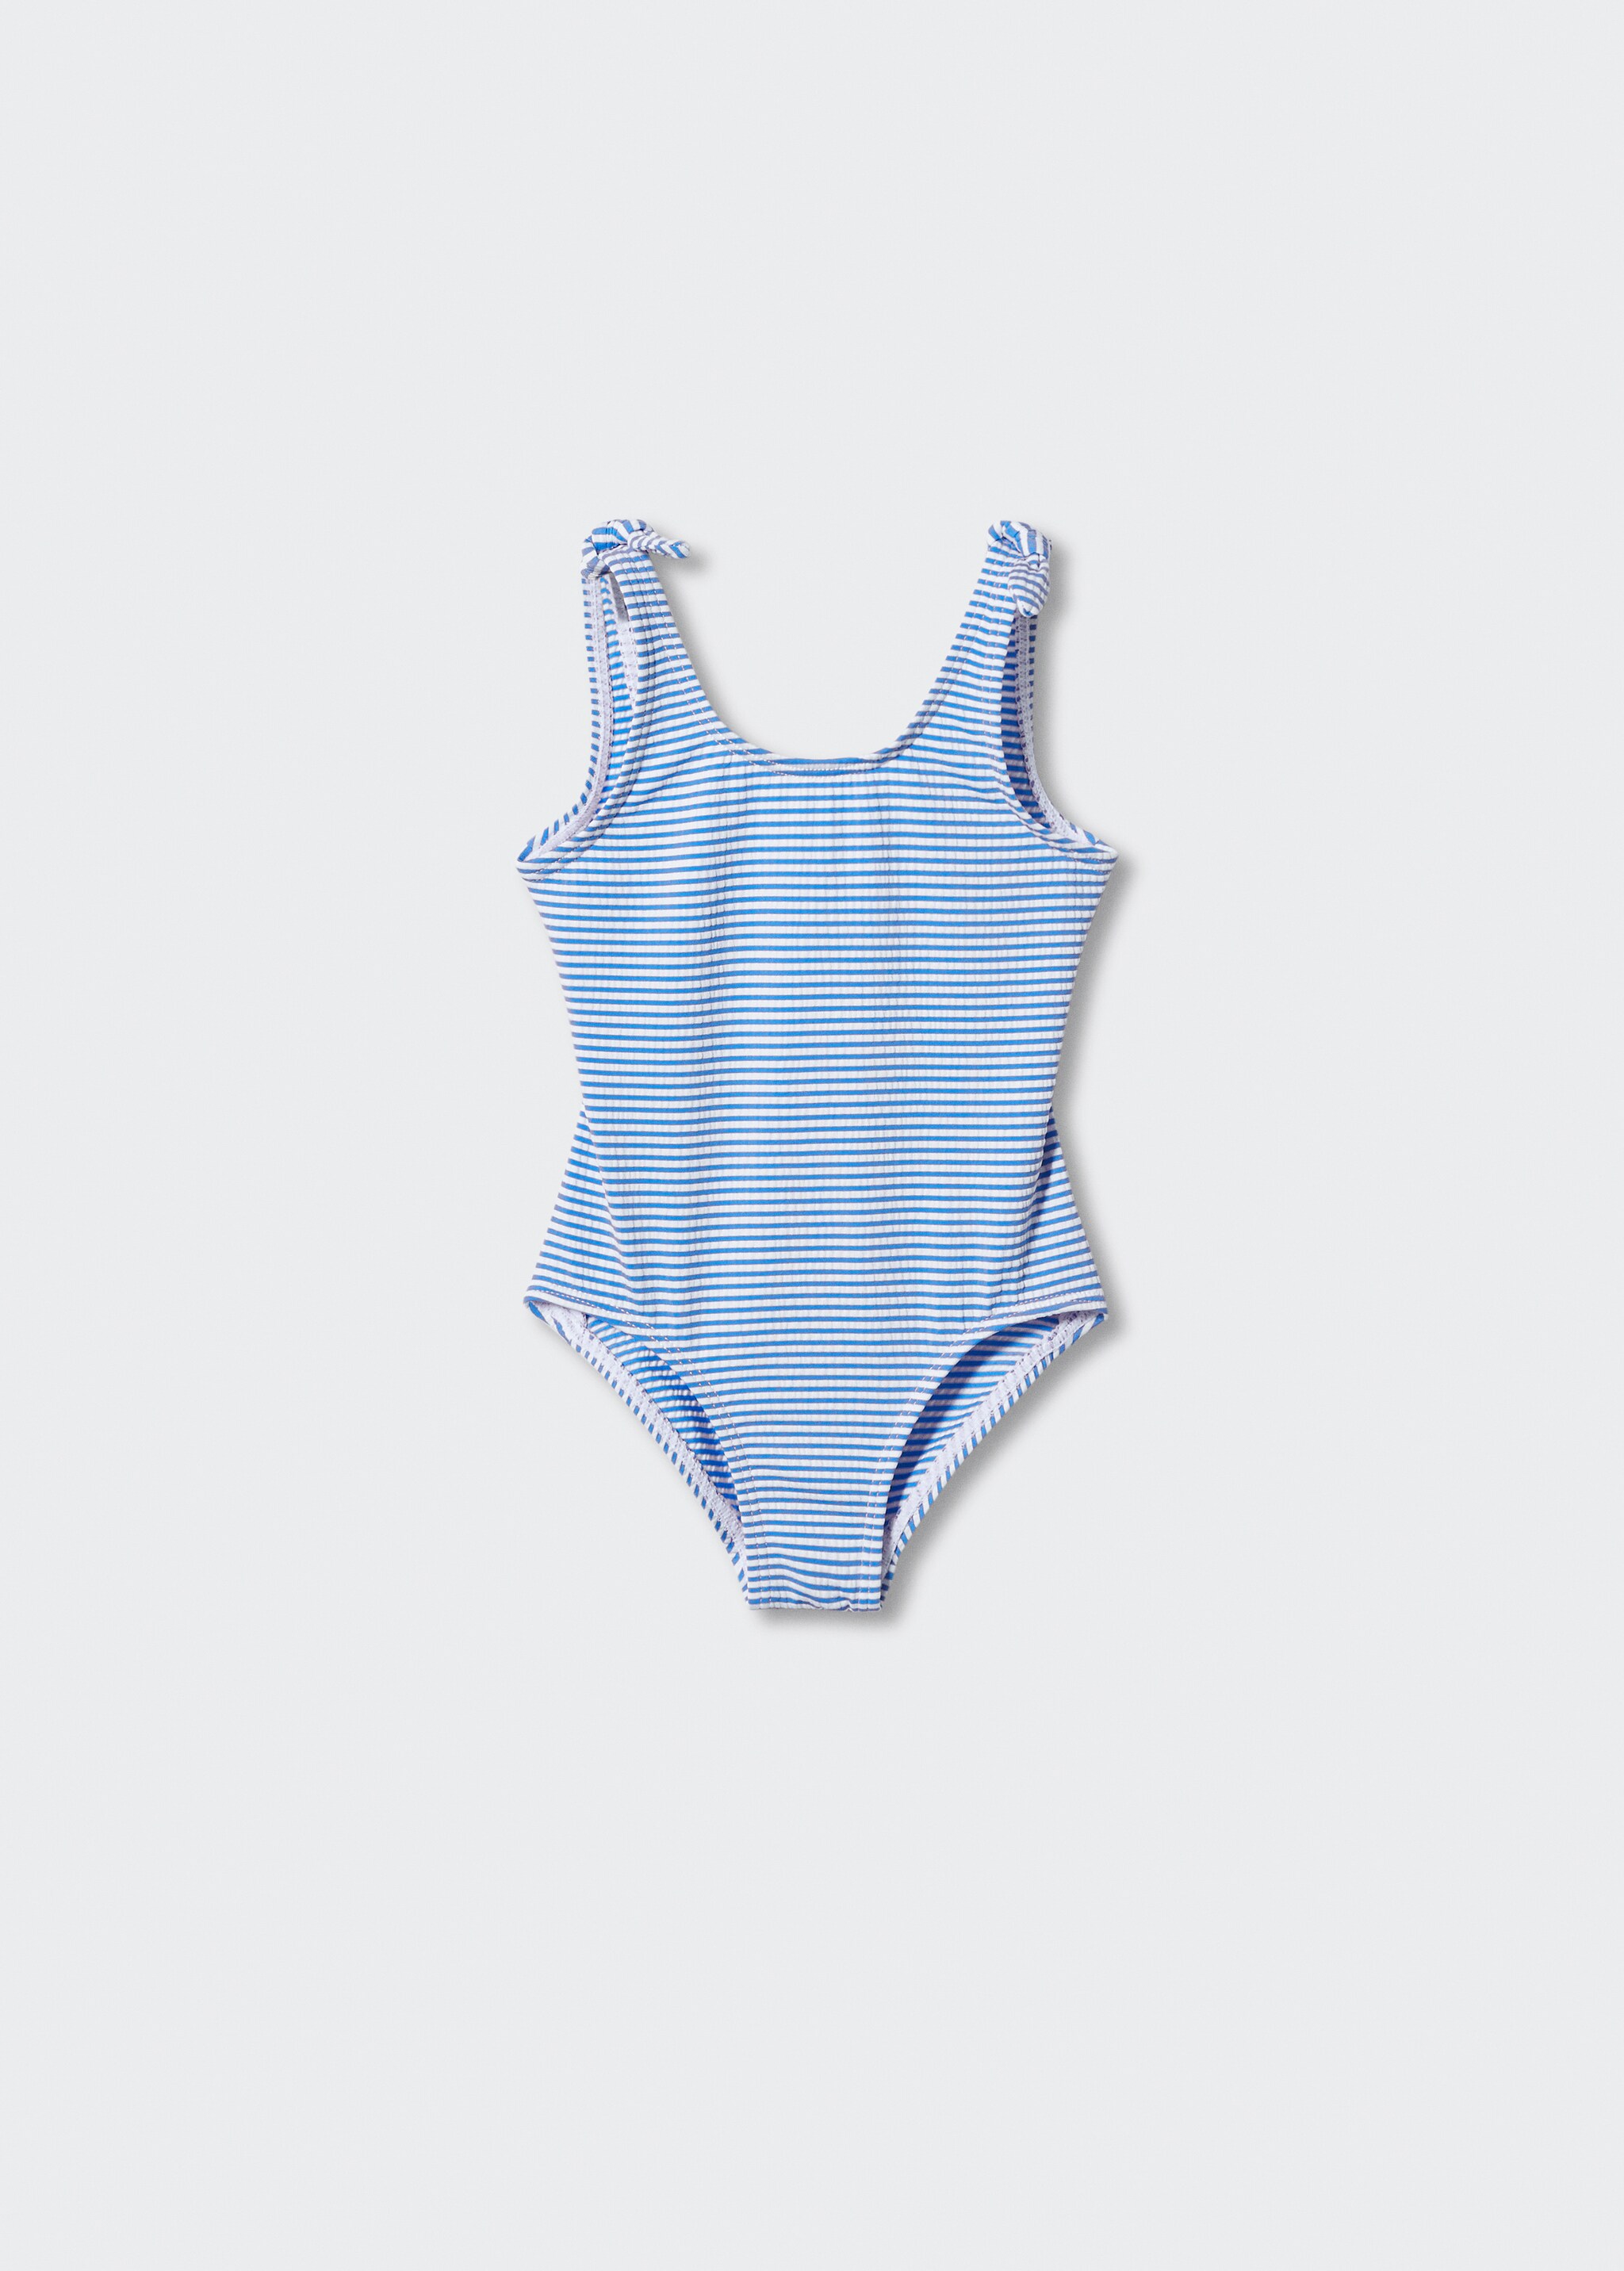 Striped swimsuit - Article without model